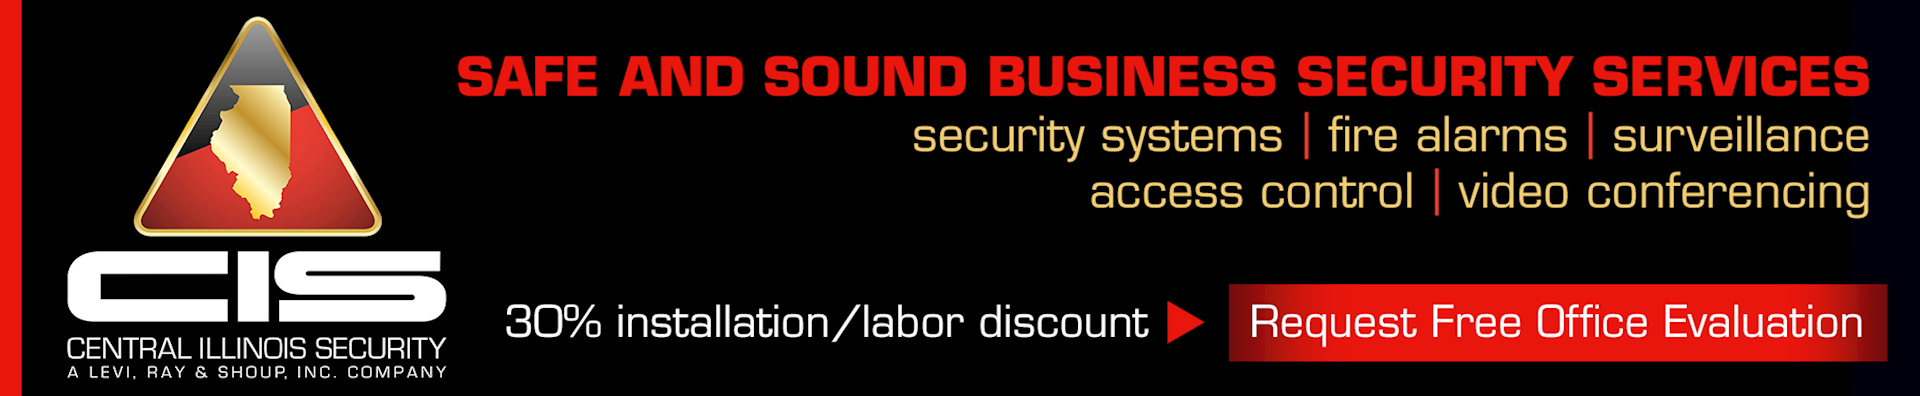 Safe and Sound Business Security Services from Central Illinois Security: security systems, fire alarms, surveillance, access control, video conferencing